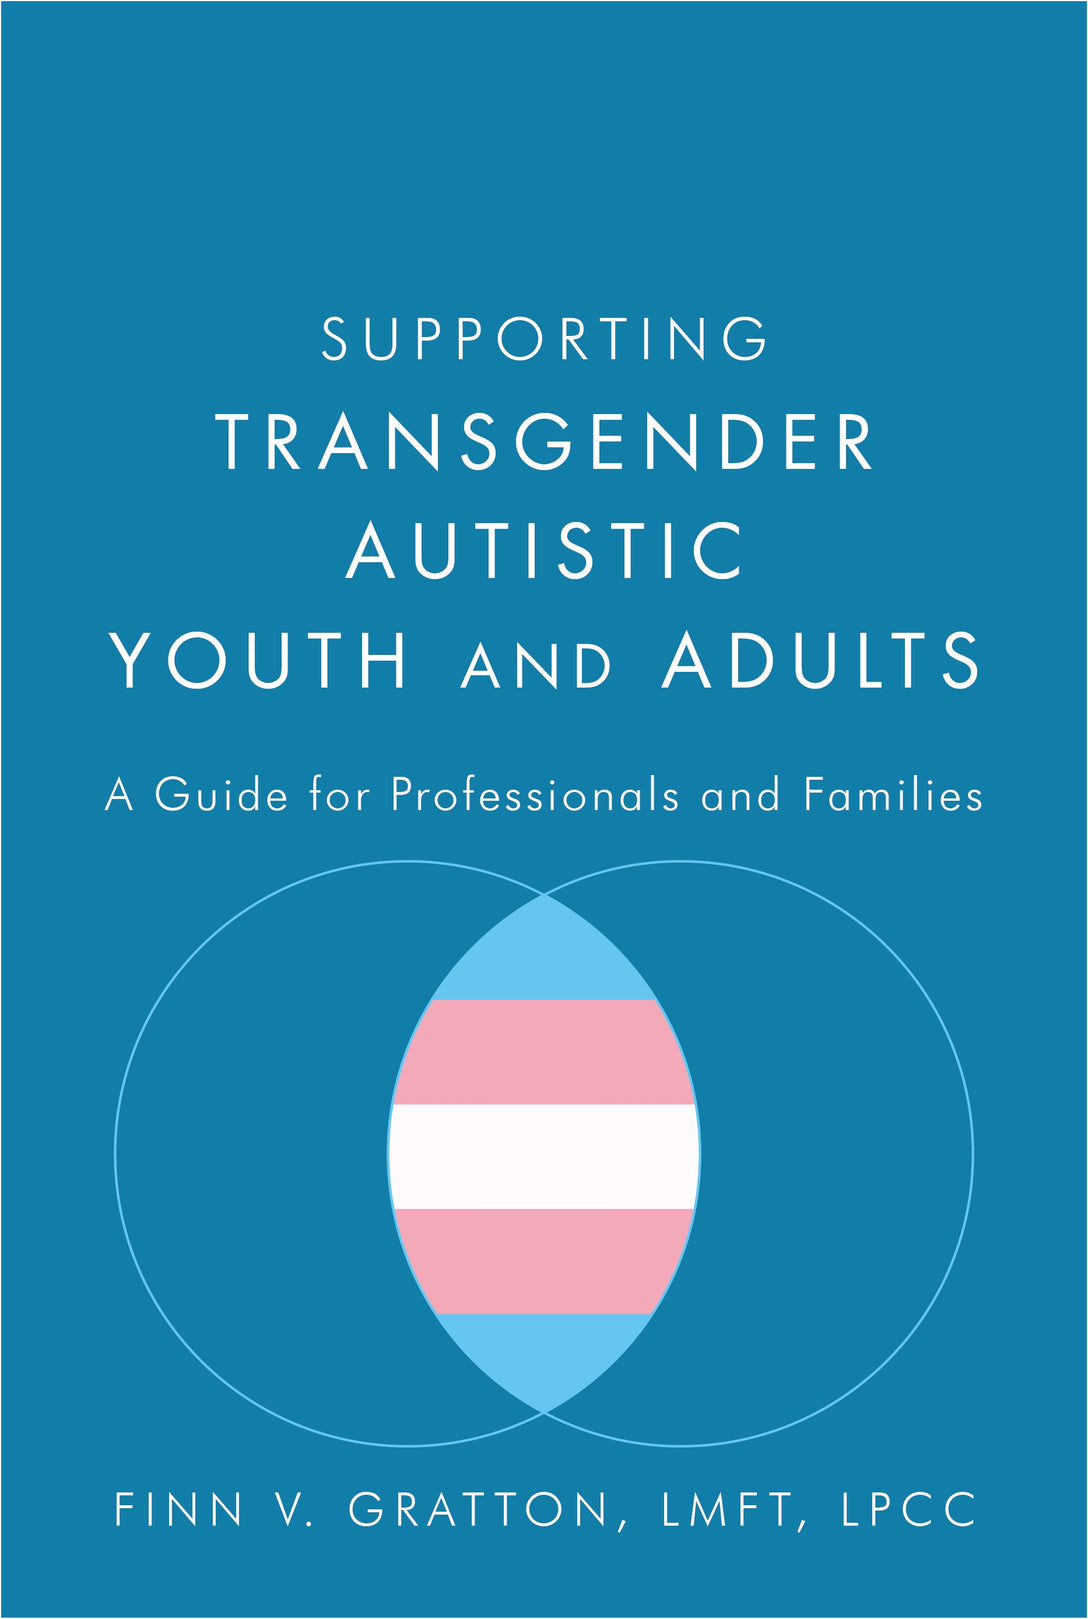 Supporting Transgender Autistic Youth and Adults by Finn V. Gratton